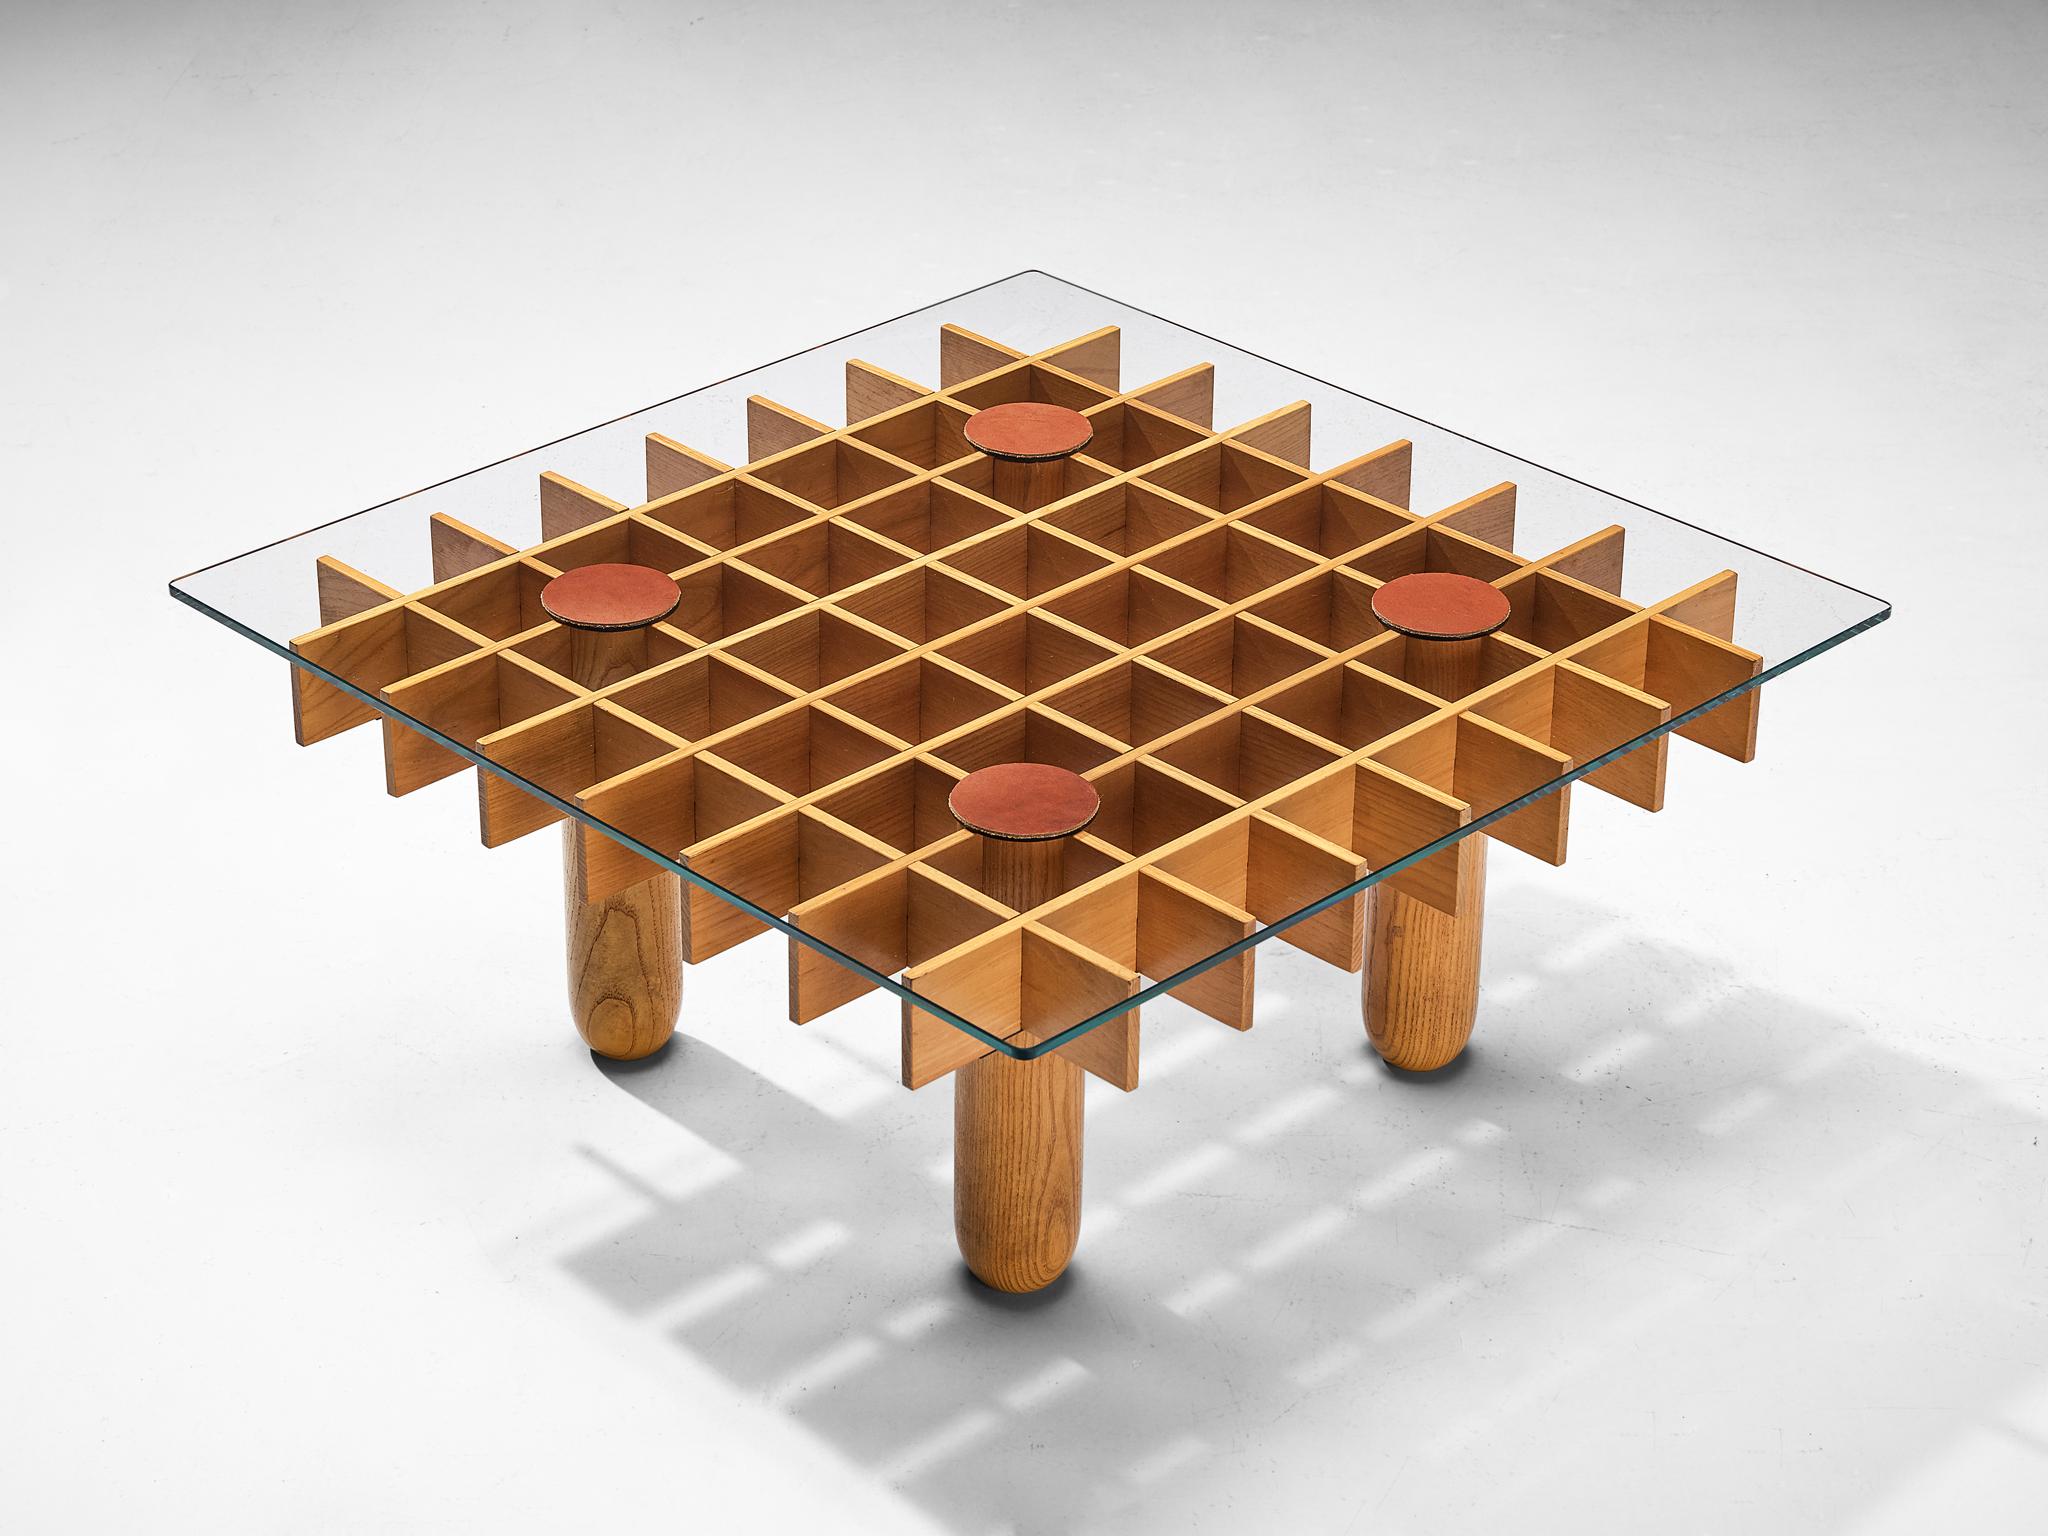 Coffee table, maple, leather, glass, Italy, 1970s

This maple coffee table from Italy consists of a wooden grid, build up out of maple laths. Four solid round legs end up in four round ends. On top of the grid rests a glass top. The construction of